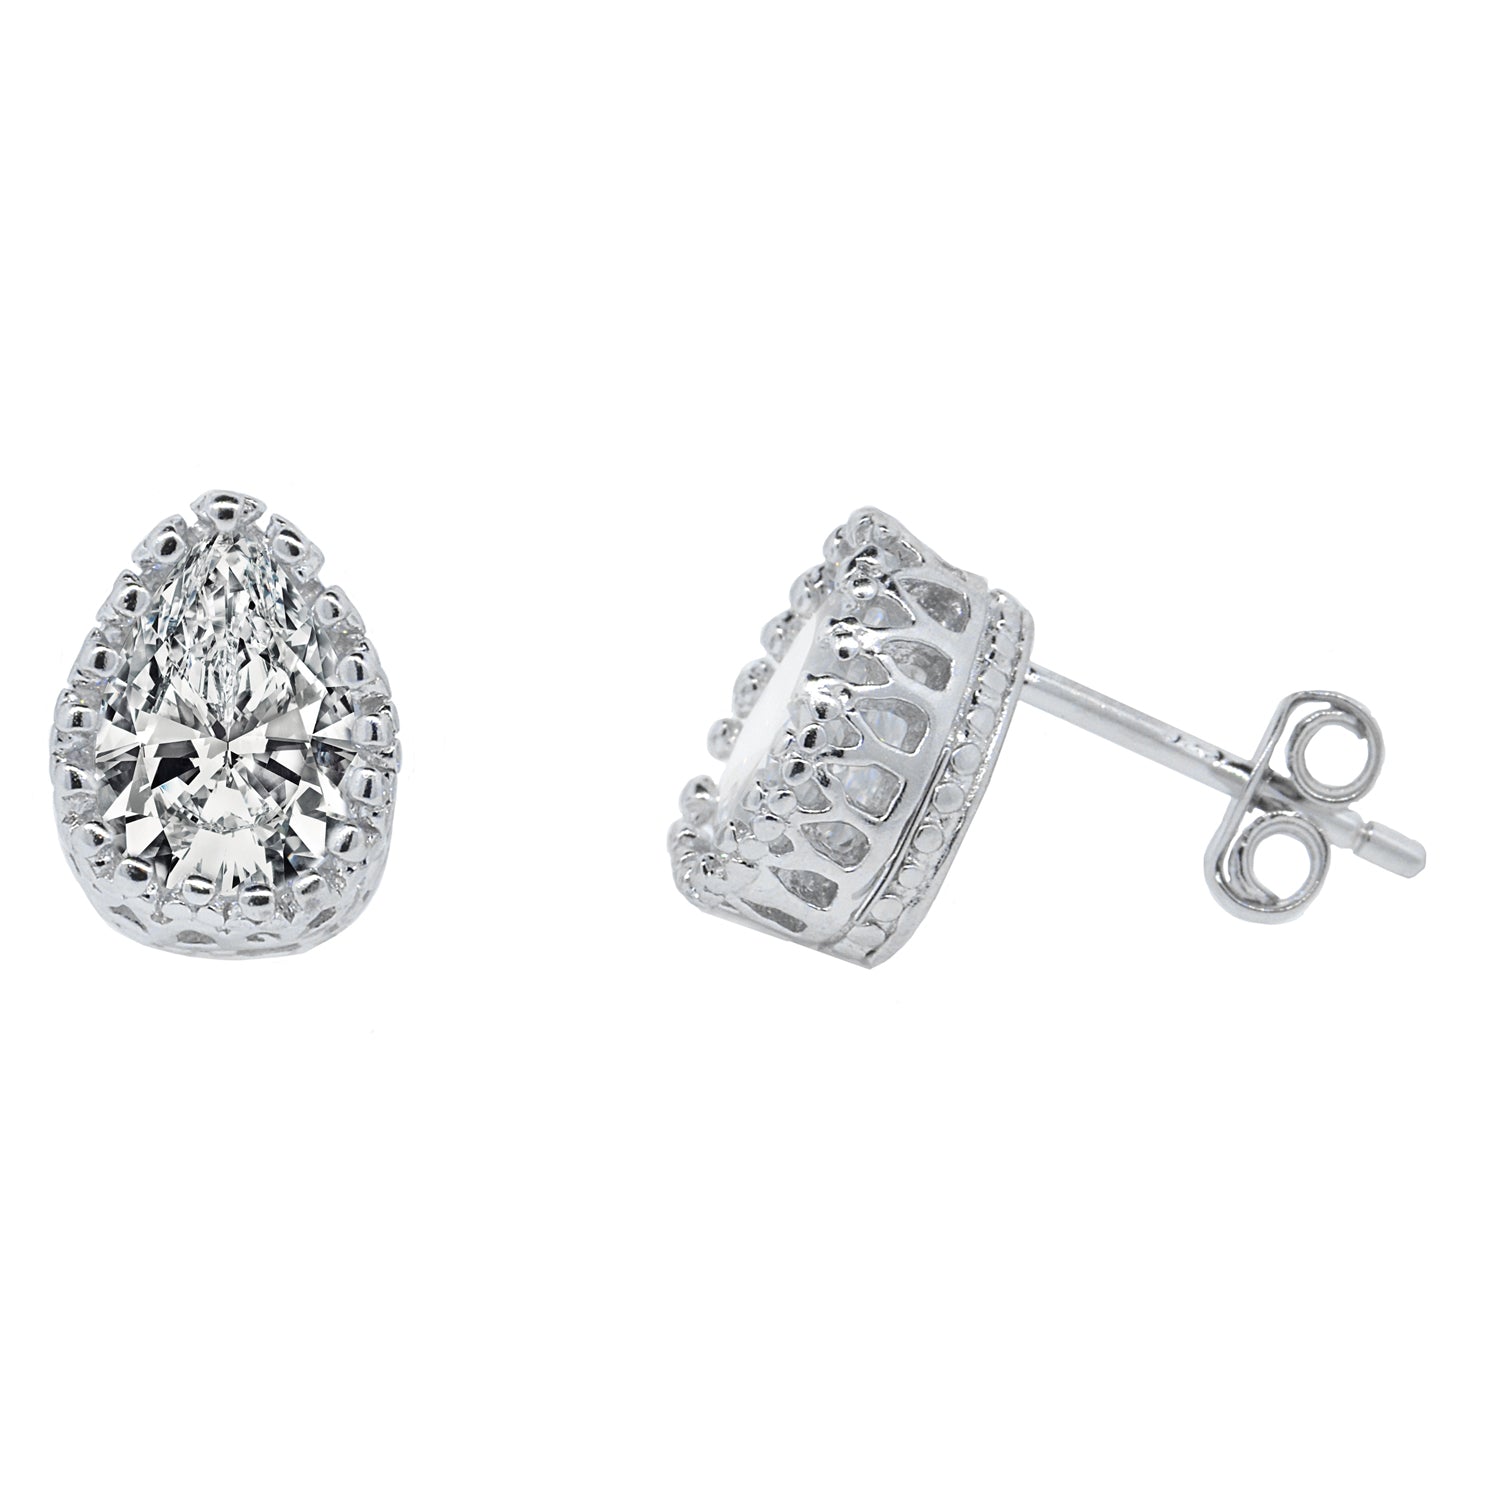 Zola 18k White Gold Plated Sterling Silver Teardrop Stud Earrings with Simulated Diamond CZ Crystals